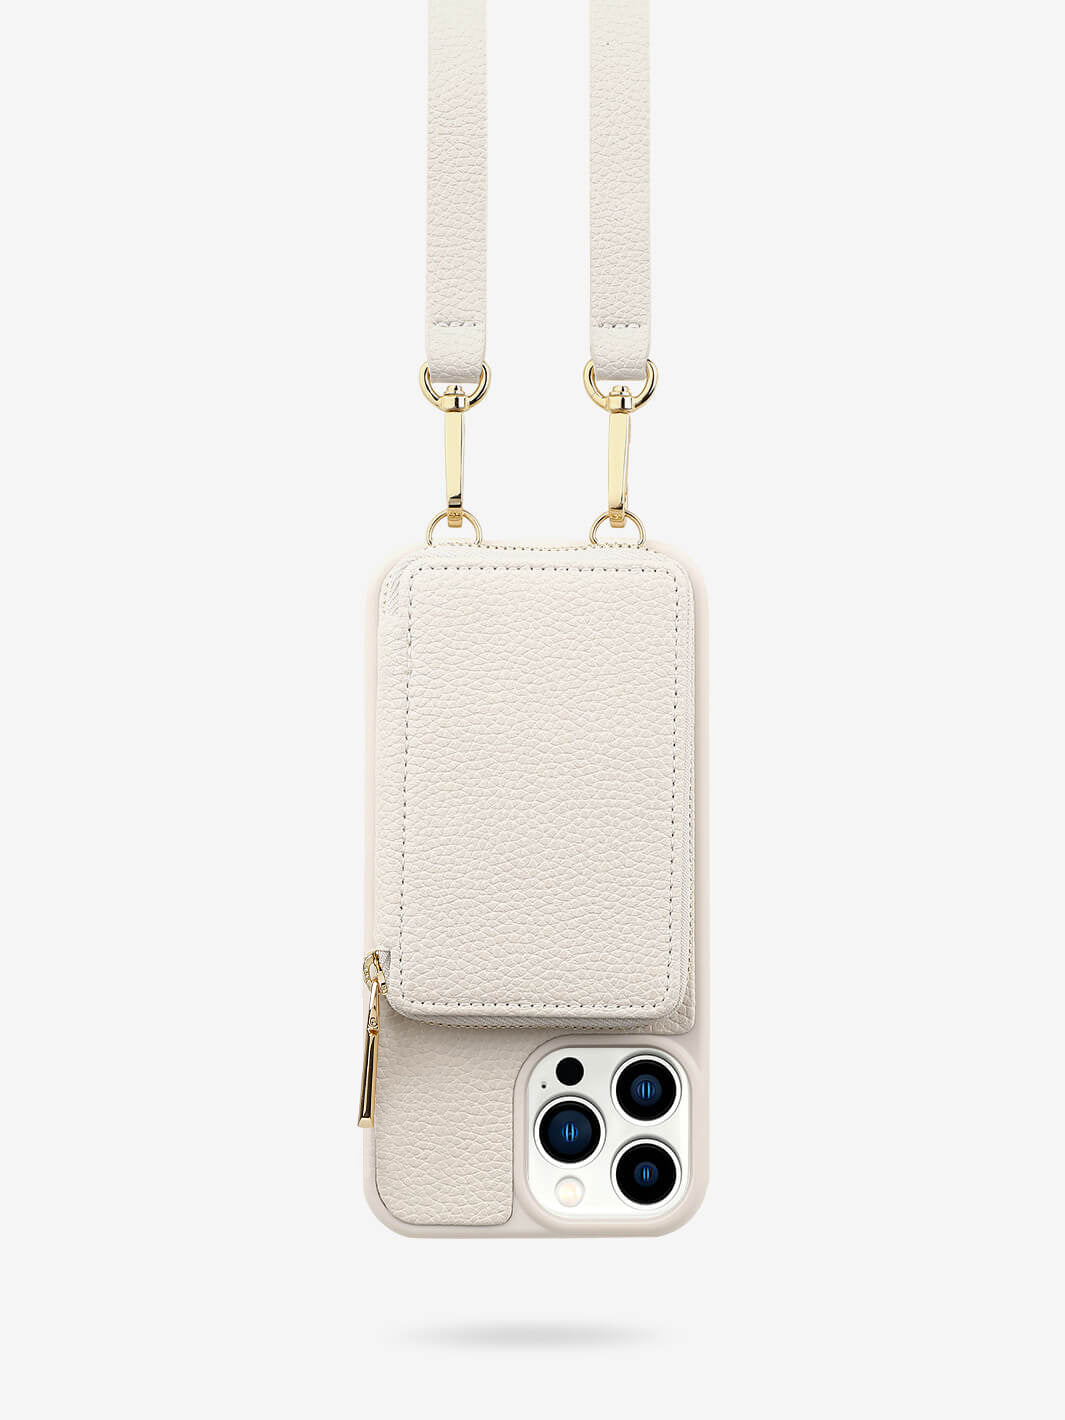 Lychee Crossbody iPhone Cover Case Phone Pouch White